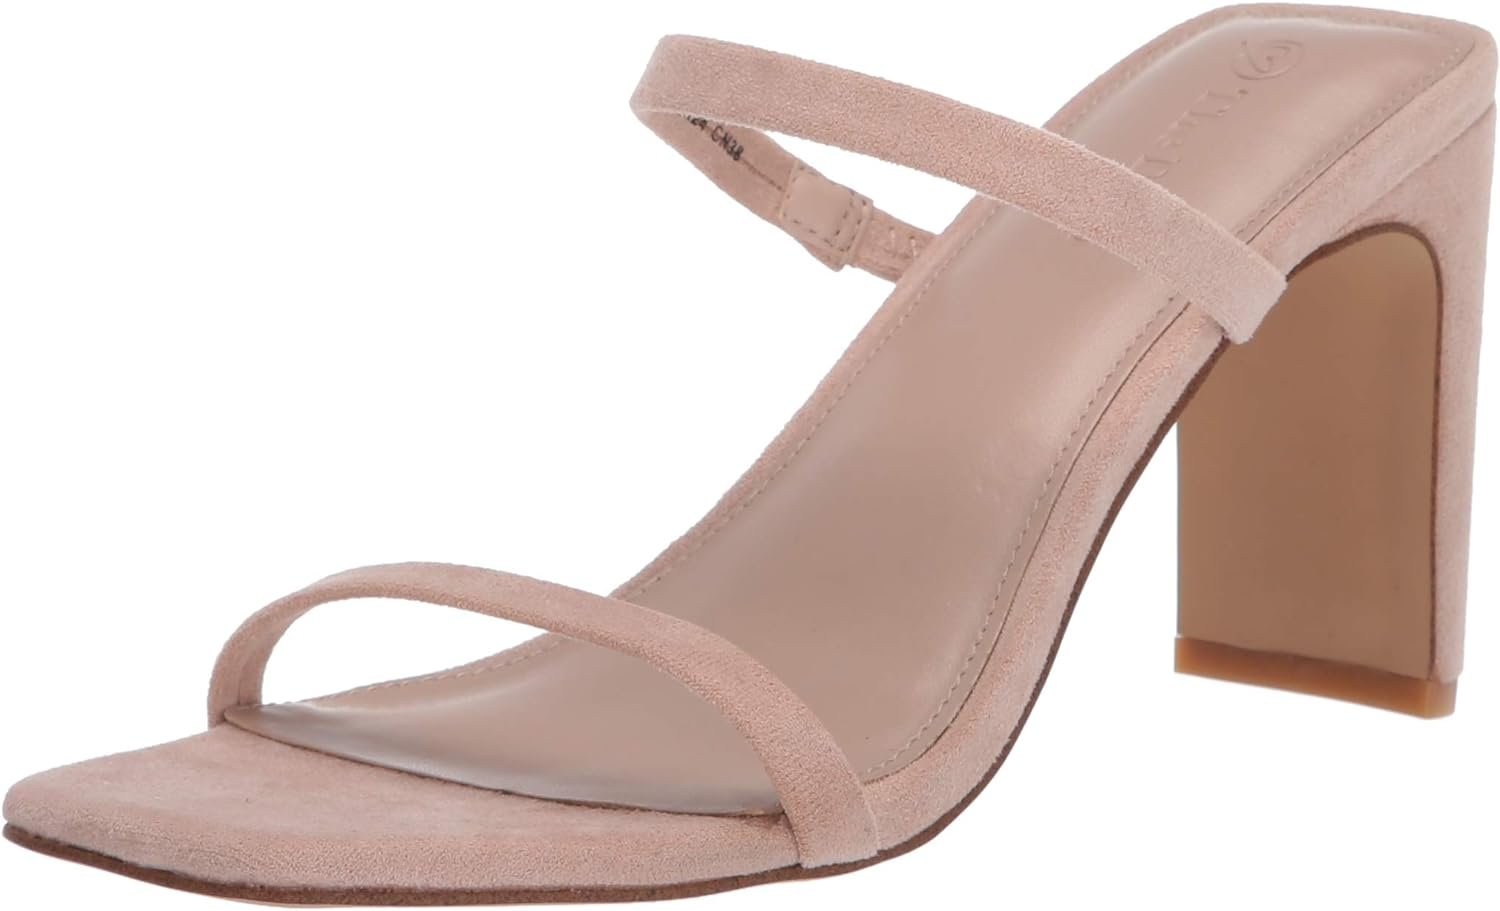 The Drop Womens Avery Square Toe Two Strap High Heeled Sandal